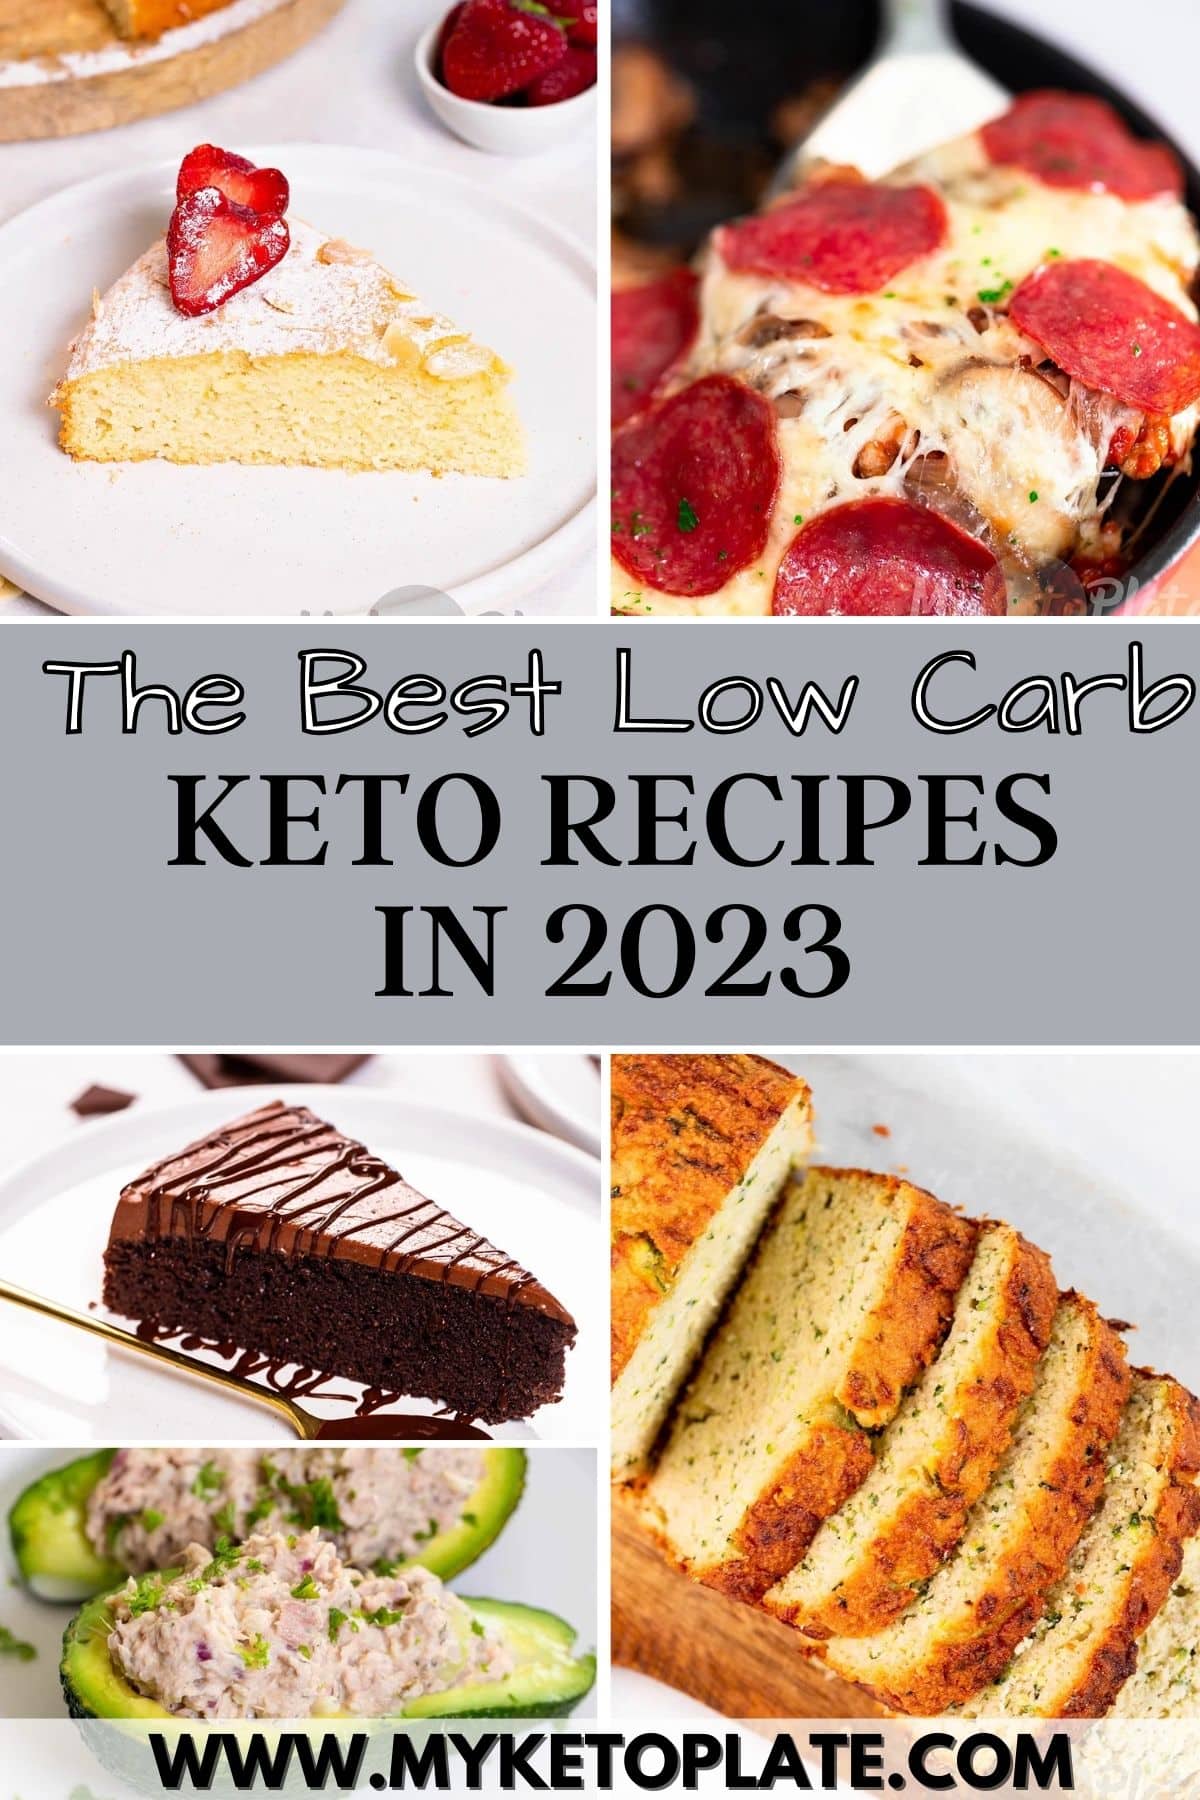 The Best Low Carb Keto Recipes In 2023